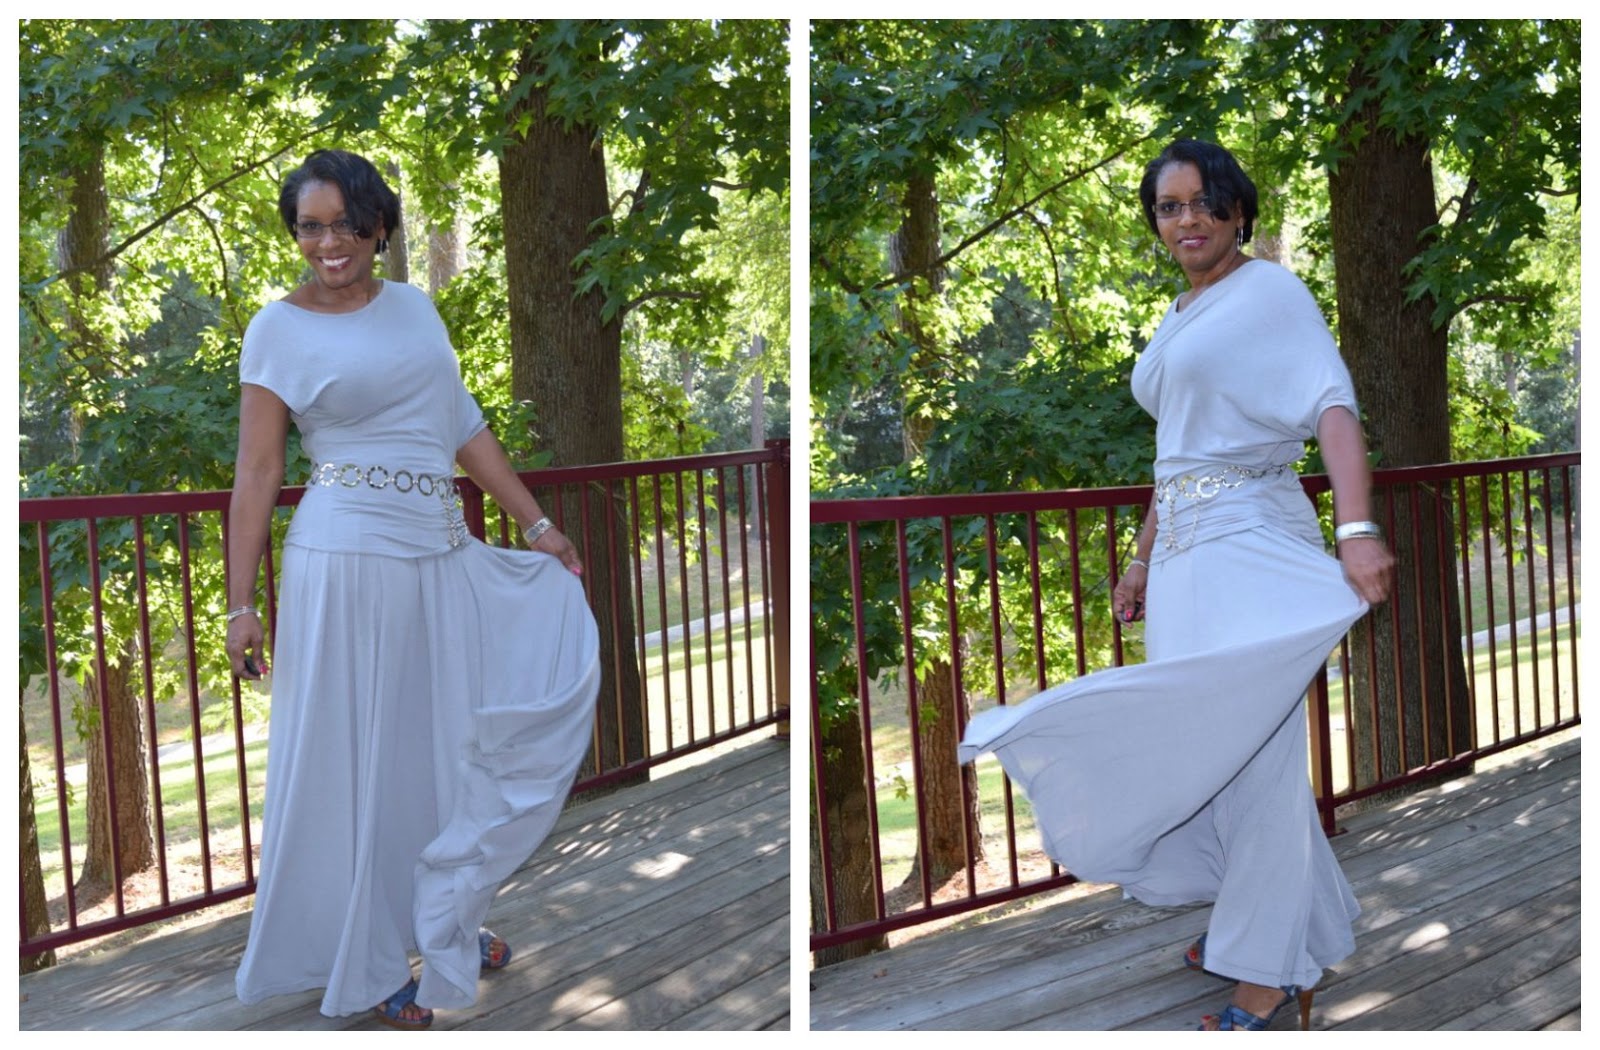 Sew-To-Fit by A.D. Lynn: Twirling fun-- The Super Full Skirt with ...